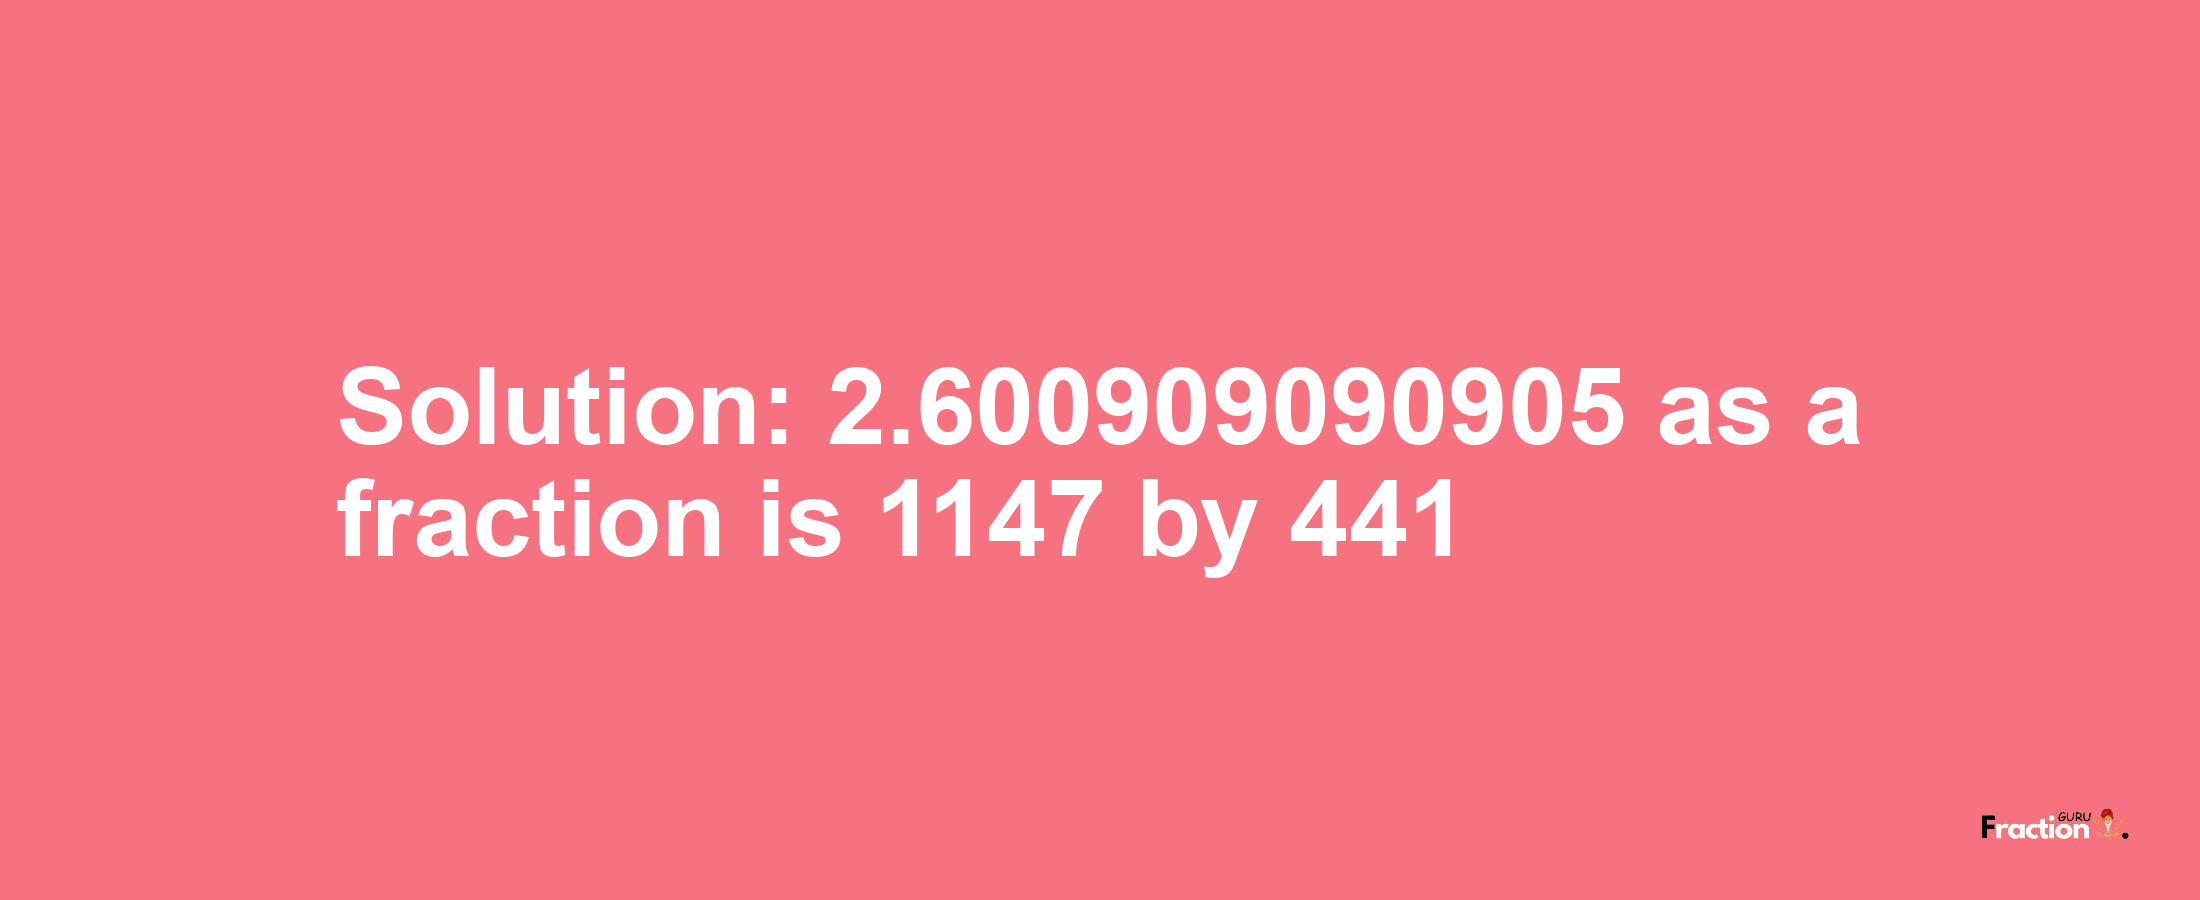 Solution:2.600909090905 as a fraction is 1147/441